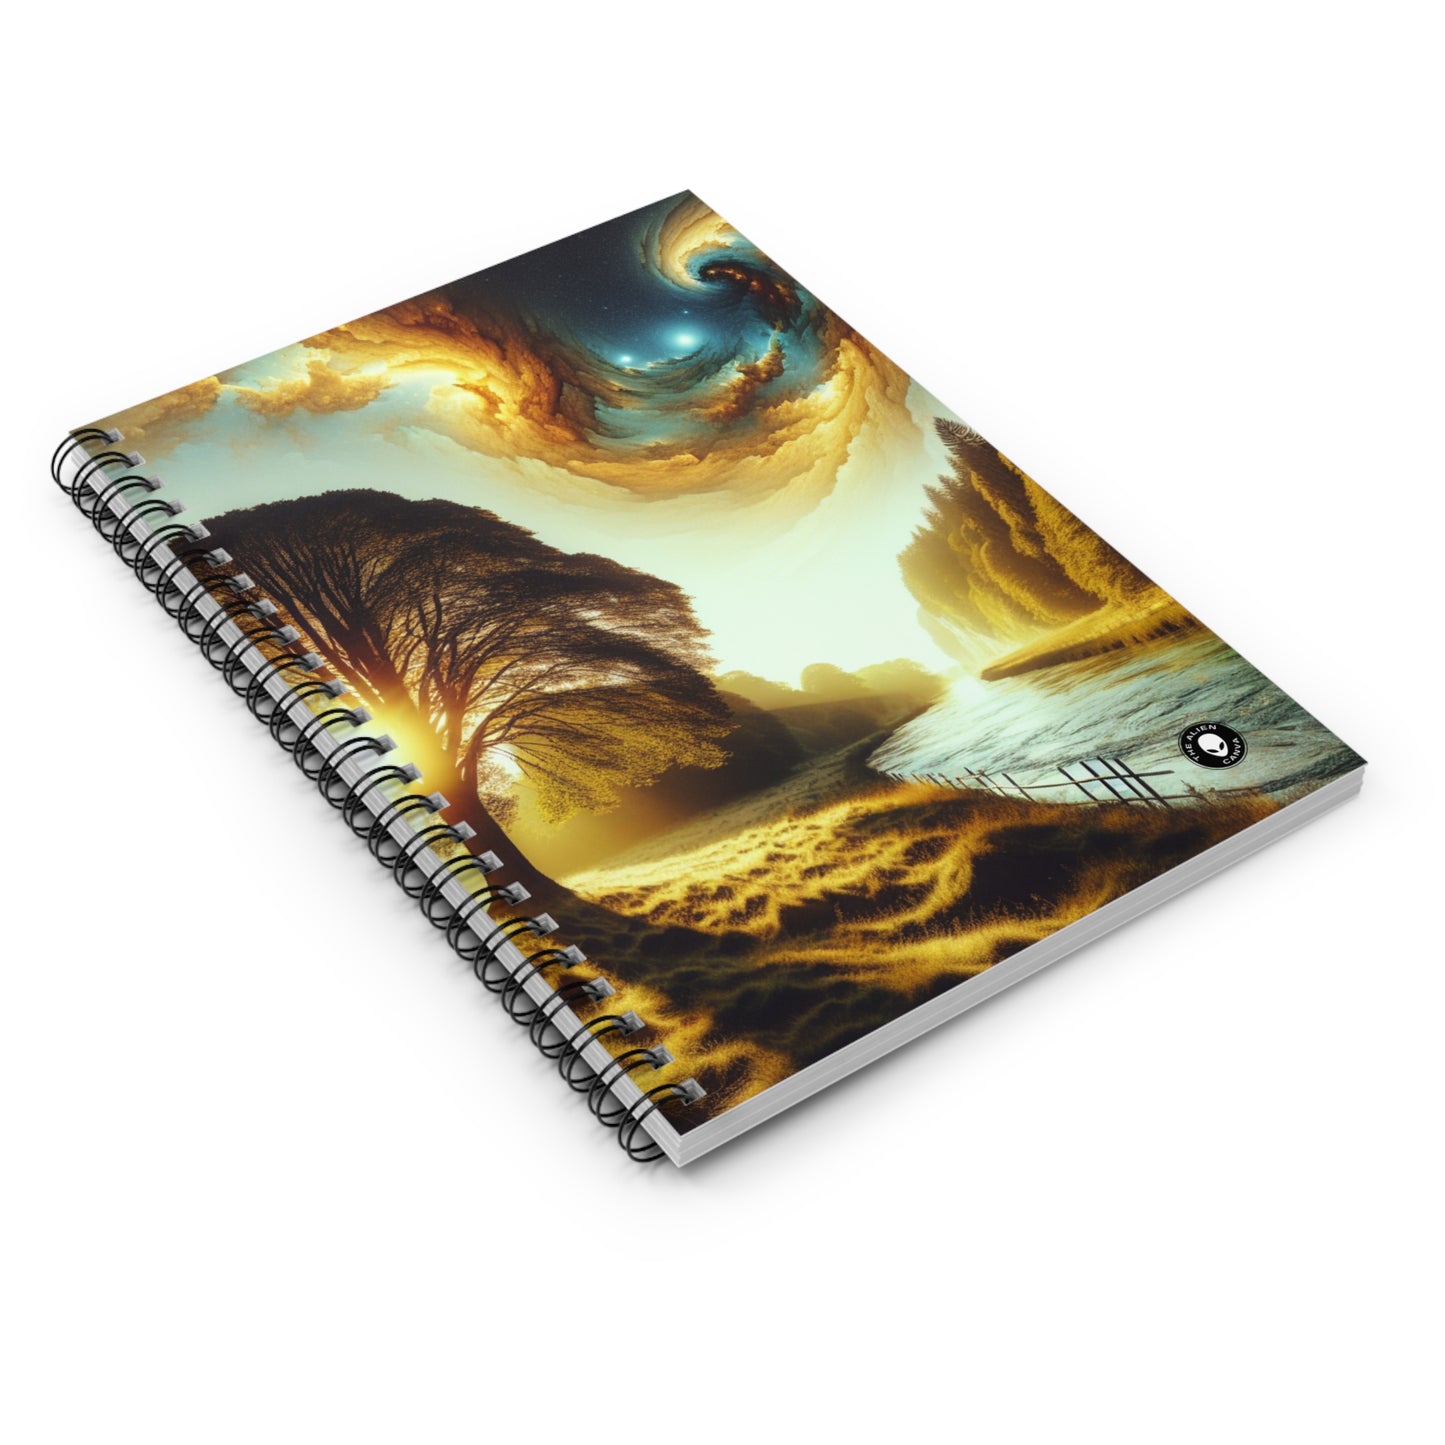 "Rebirth of the Forest: A Recycled Ecosystem" - The Alien Spiral Notebook (Ruled Line) Environmental Art